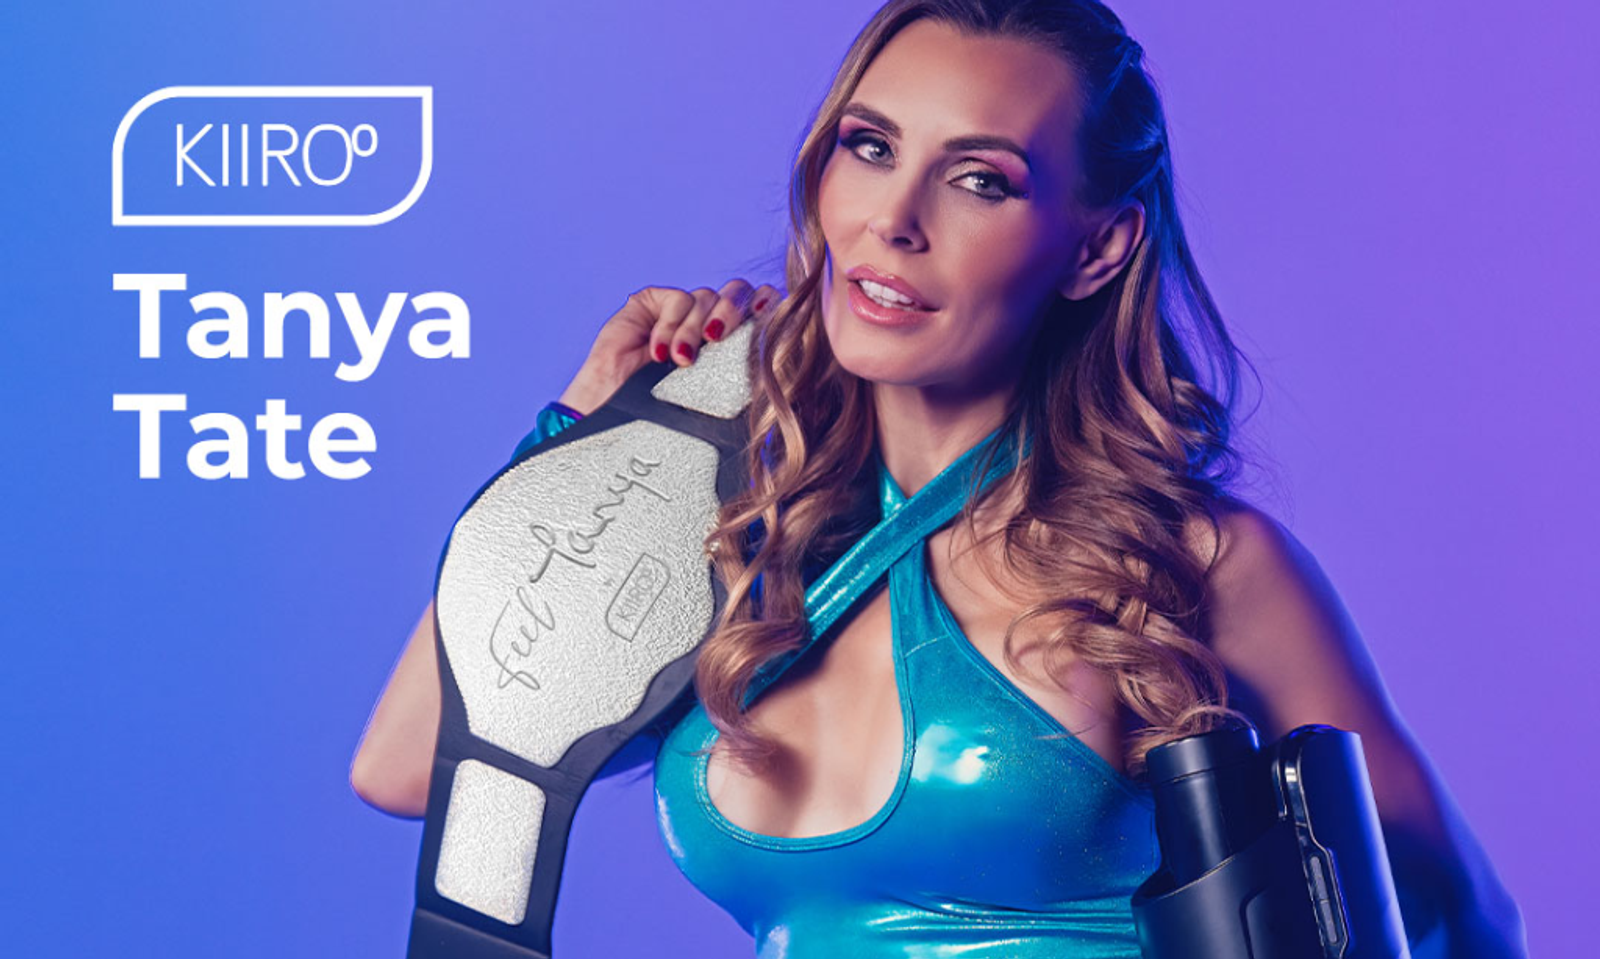 Kiiroo Offers 4th of July Sale on Tanya Tate & Other FeelStars